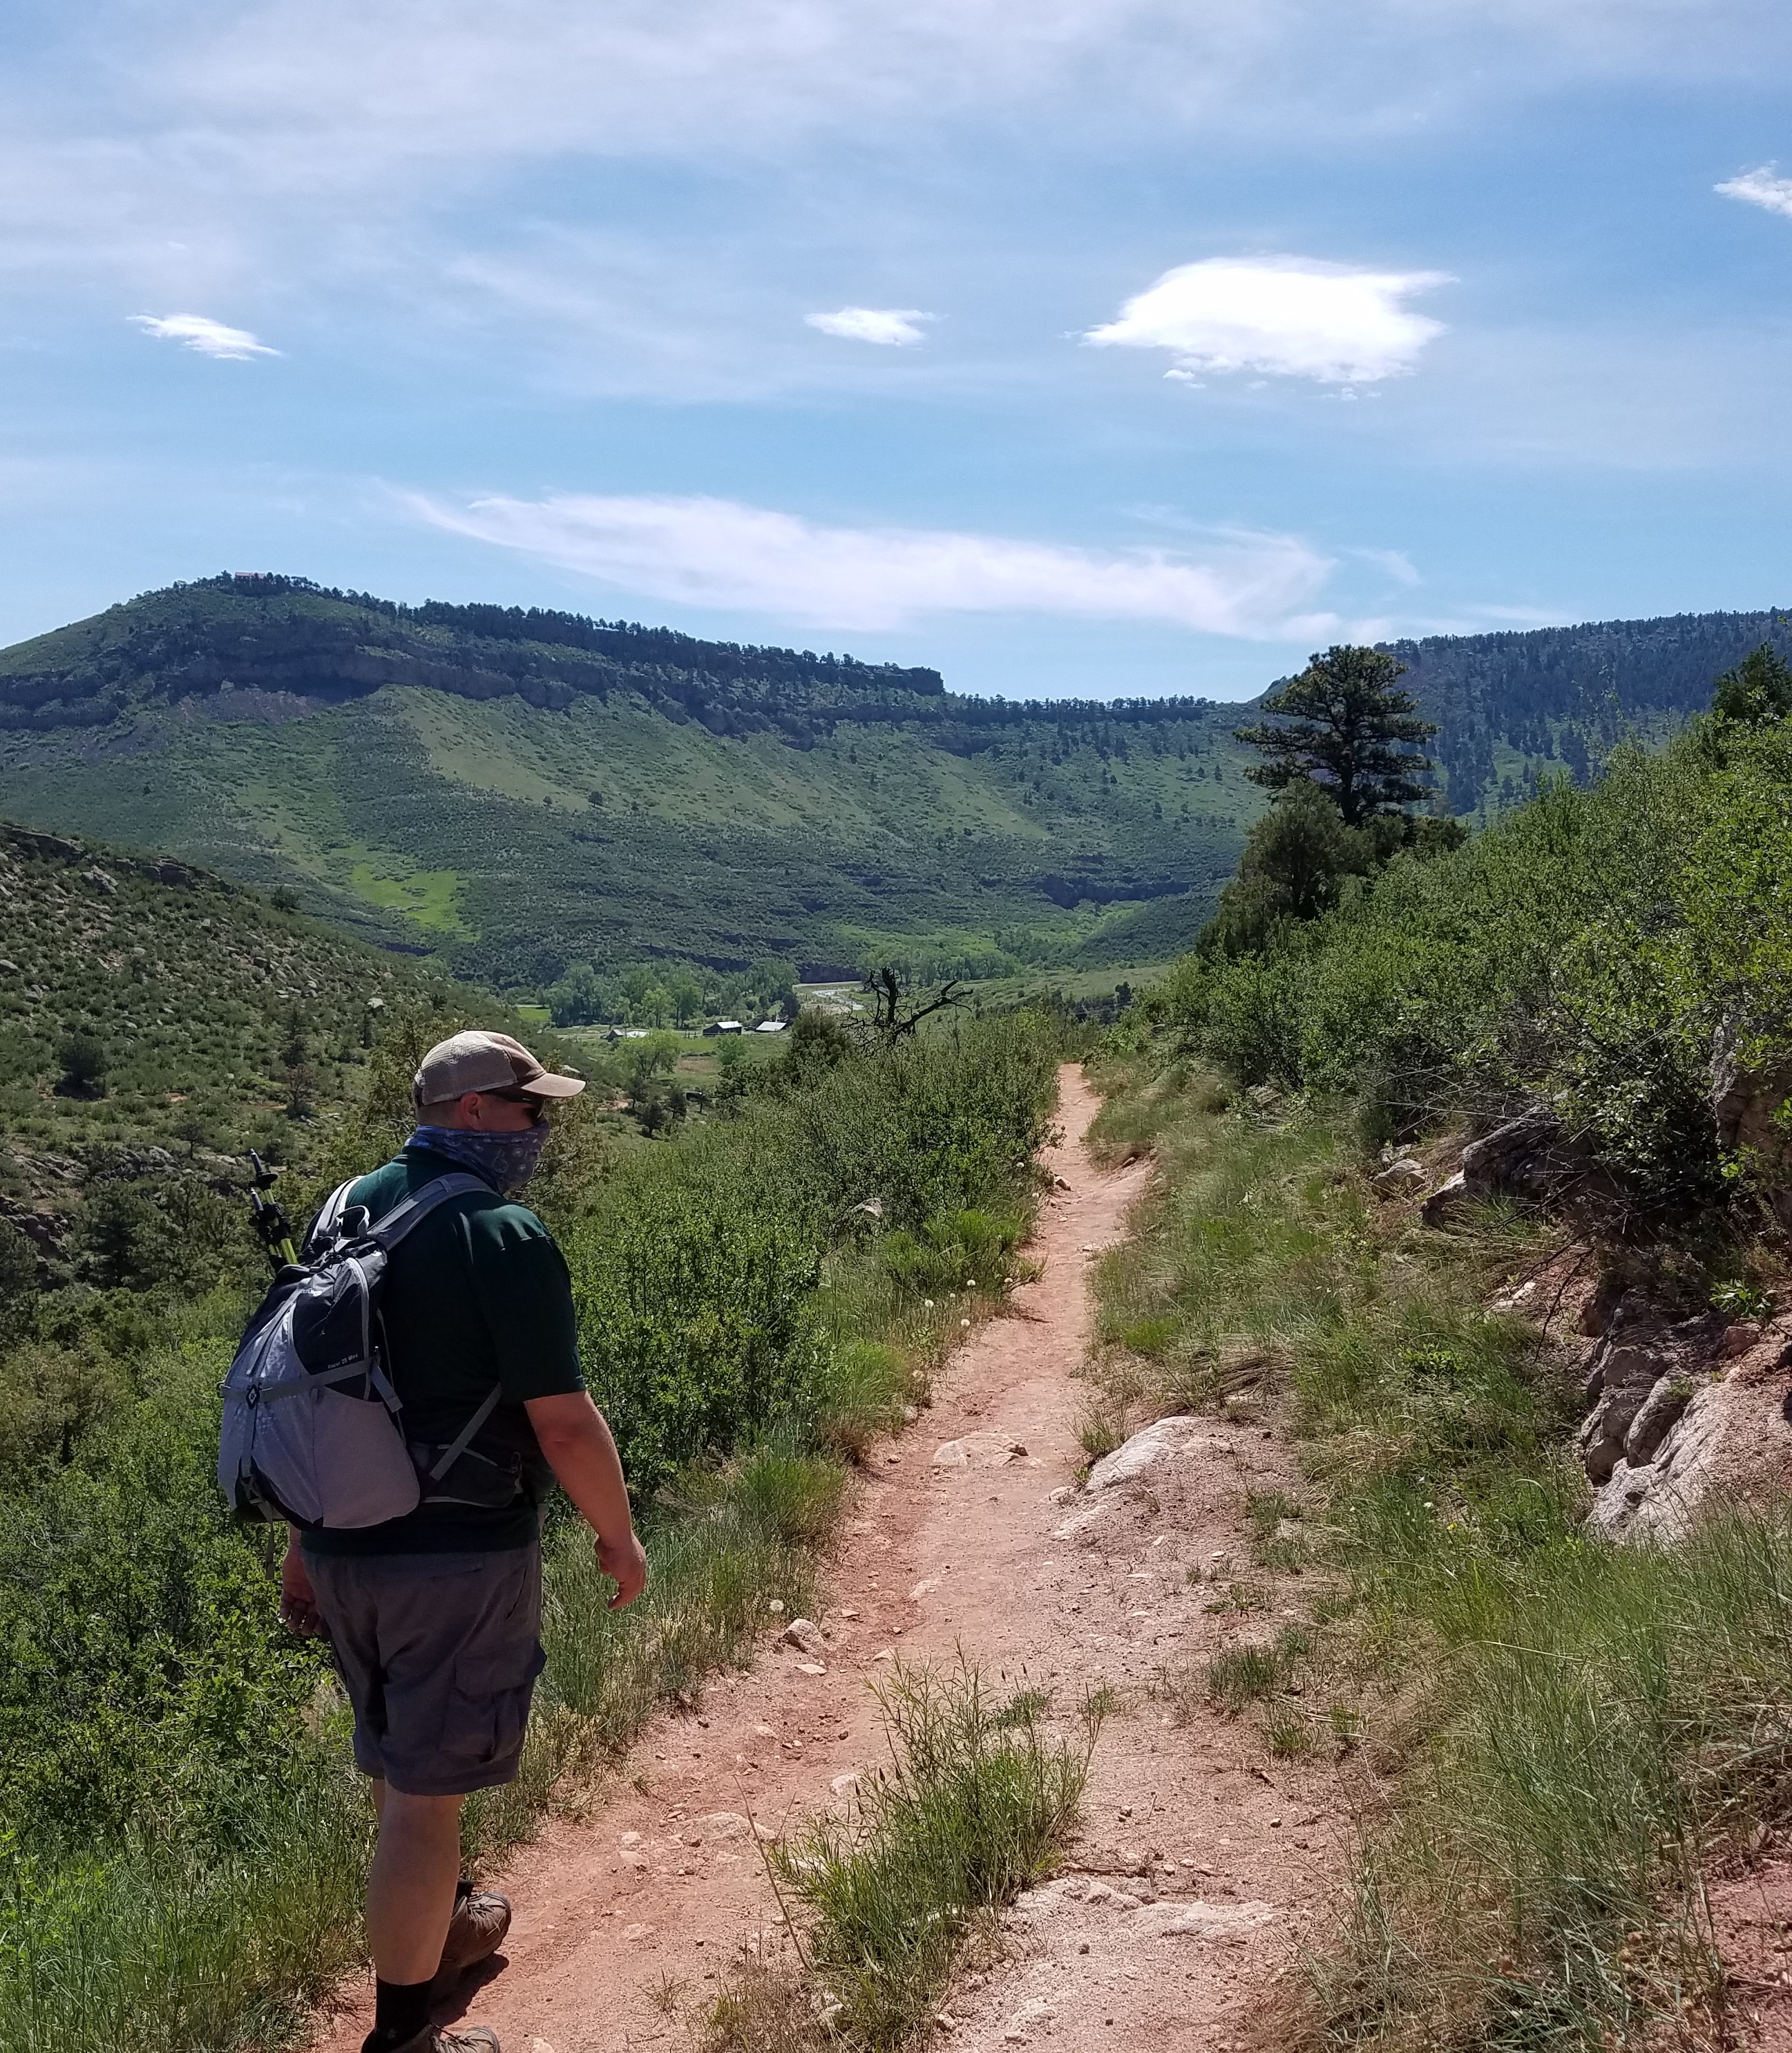 Photo of a lone hiker enjoying a sunny day on the trail. The green hillsides are visible in the background. In the foreground, a man wearing shorts, a t-shirt, a gray backpack, a baseball cap, and sun glasses is walking along the narrow dirt trail. He is also wearing a bandana over his mouth, in keeping with the Covid-19 protocols of the time.